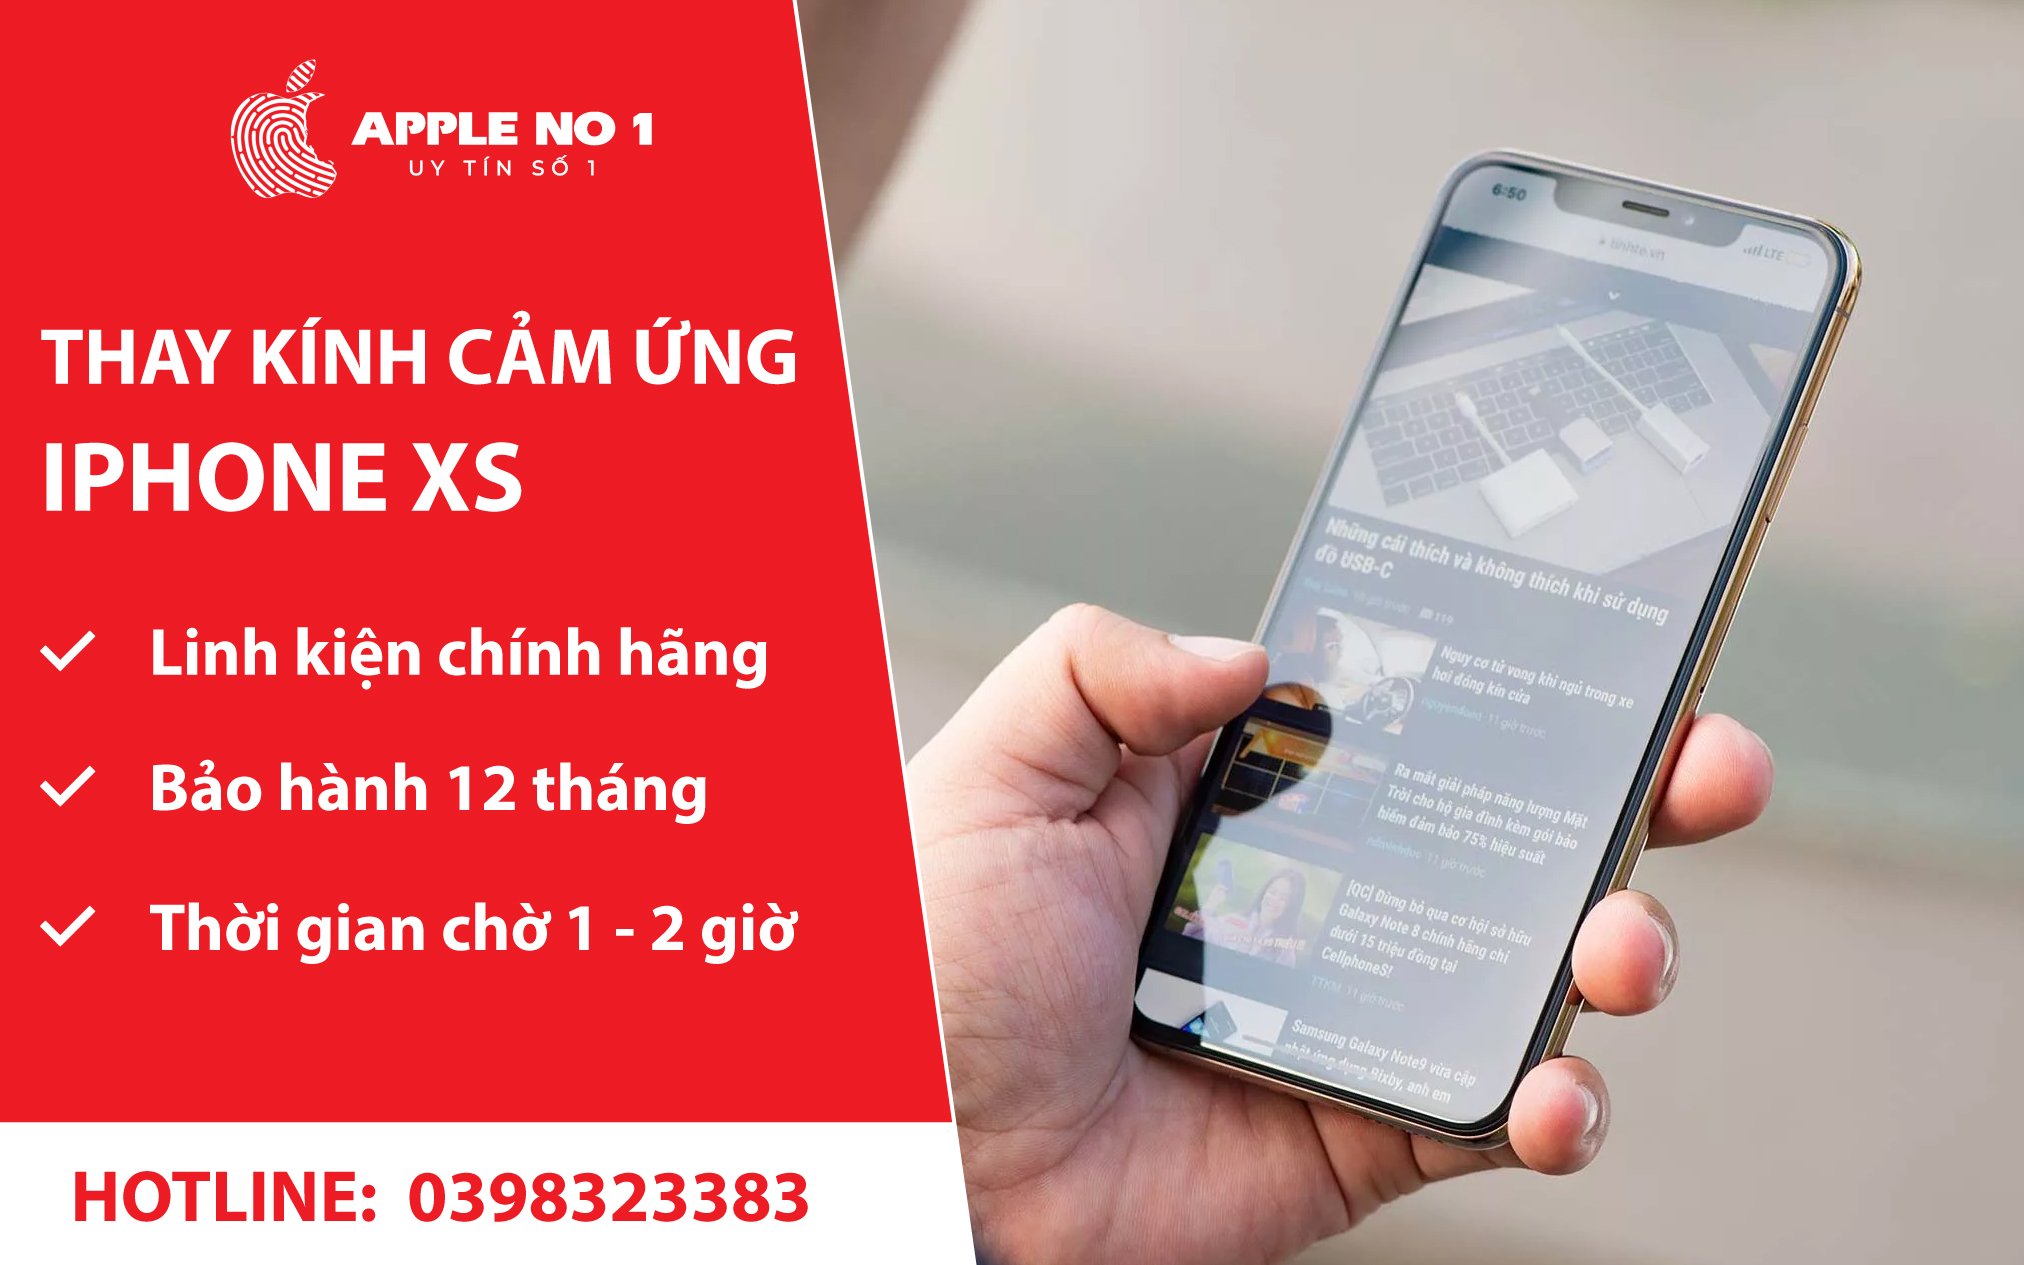 dich vu thay kinh cam ung iphone xs gia re lay ngay trong 2 tieng tai apple no.1